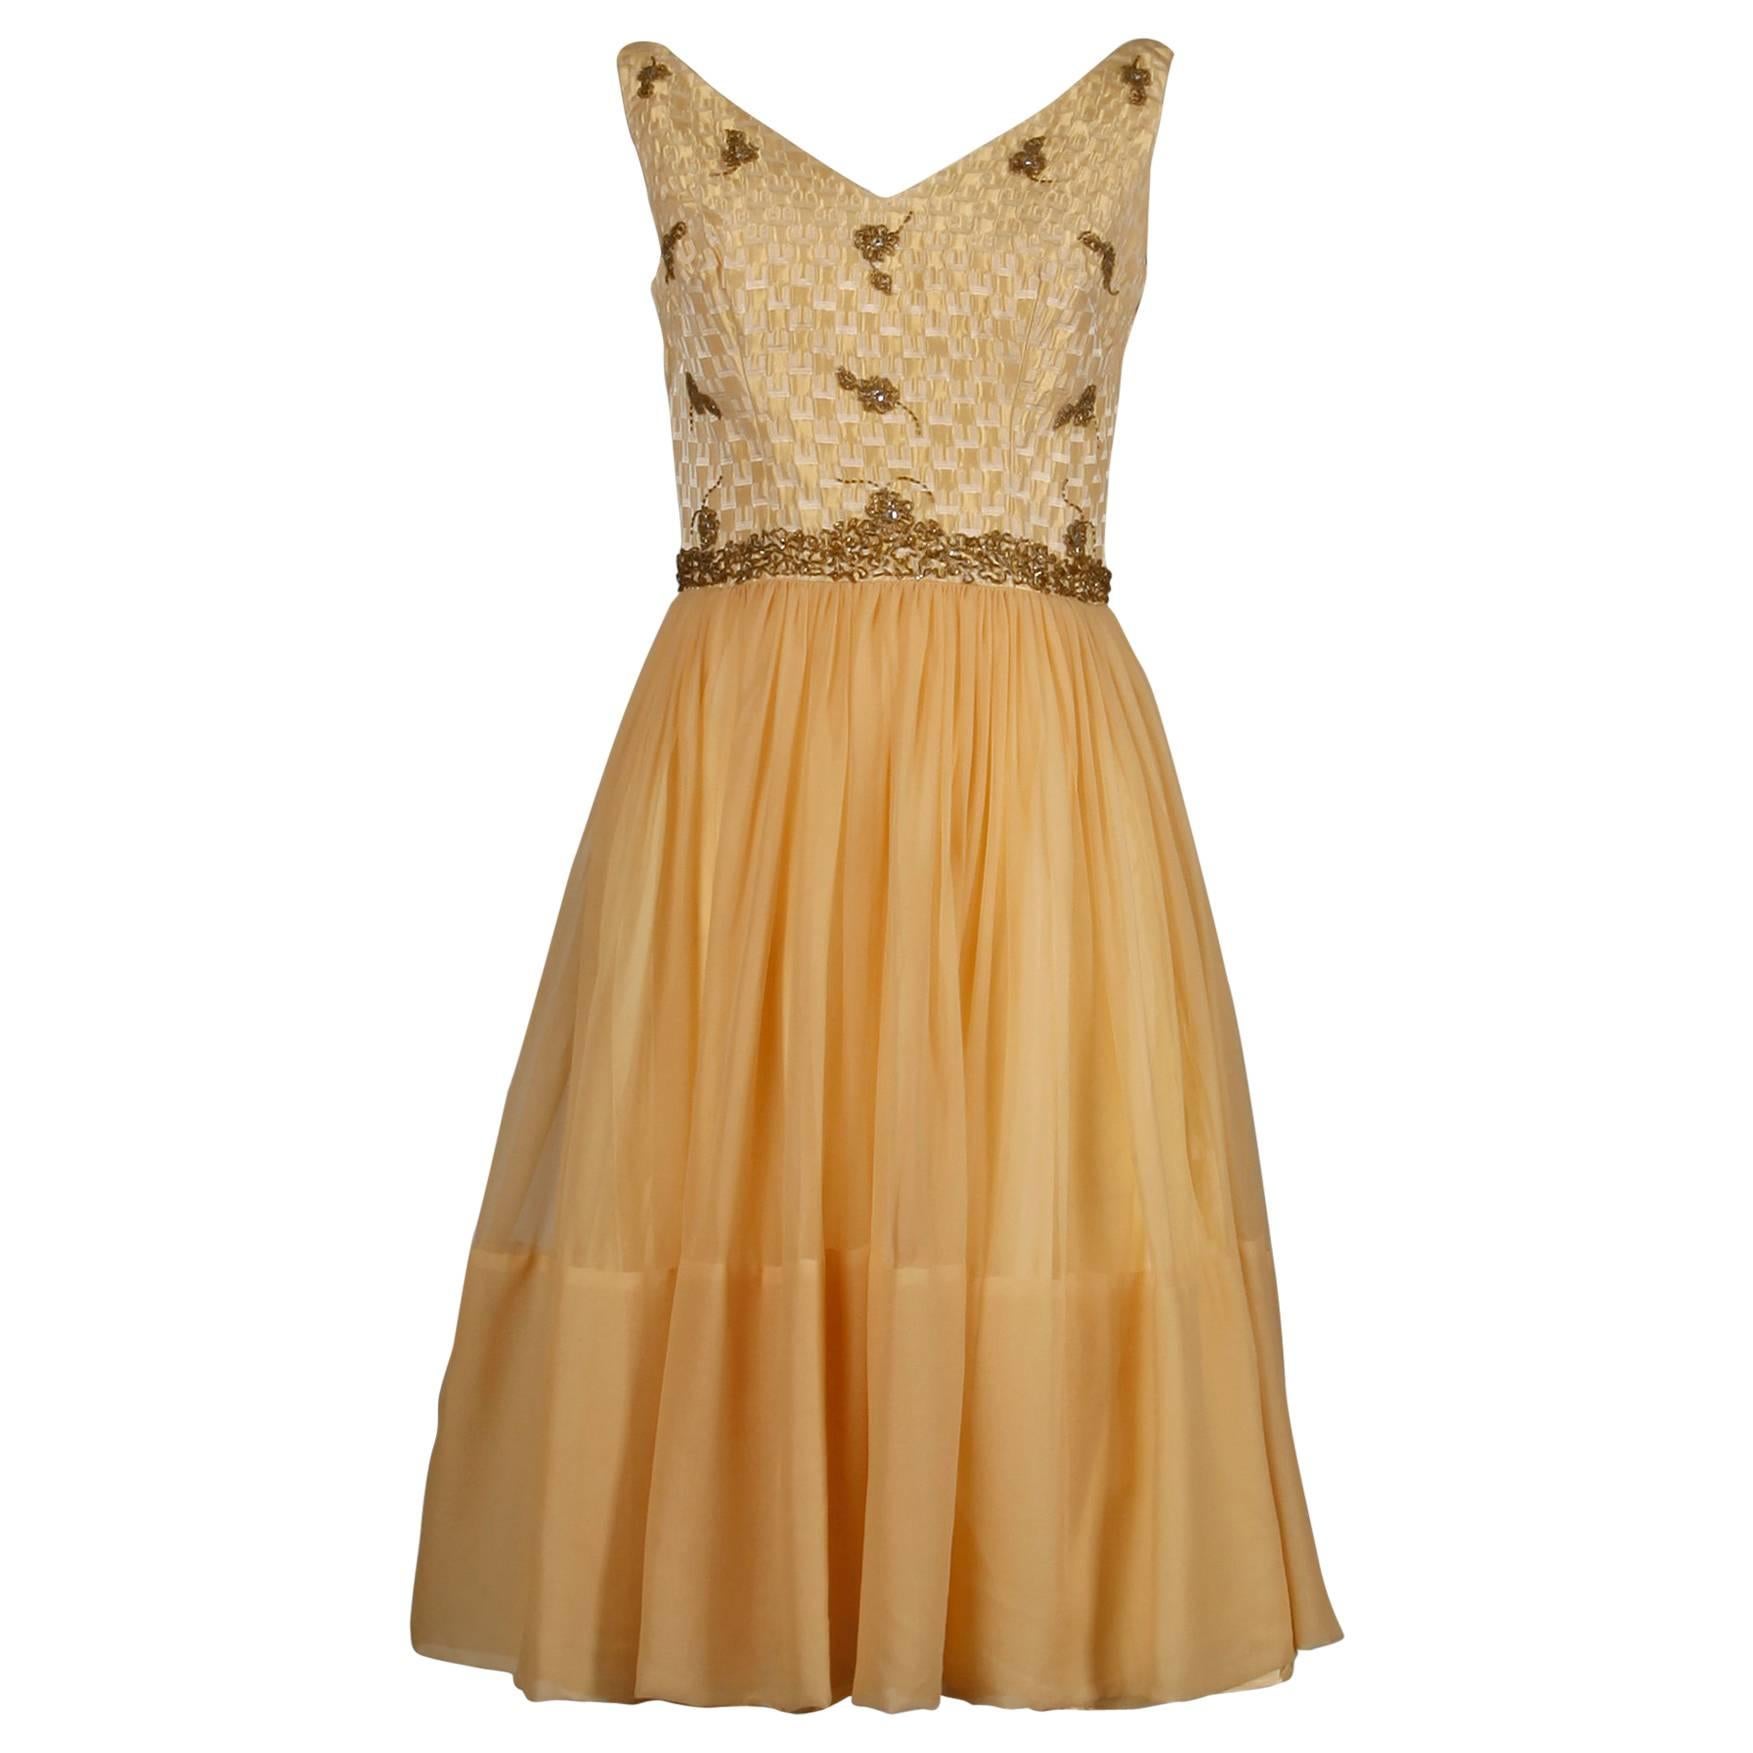 Women's 1960s Mam'selle Vintage Gold Beaded Brocade + Silk Chiffon Cocktail Dress For Sale